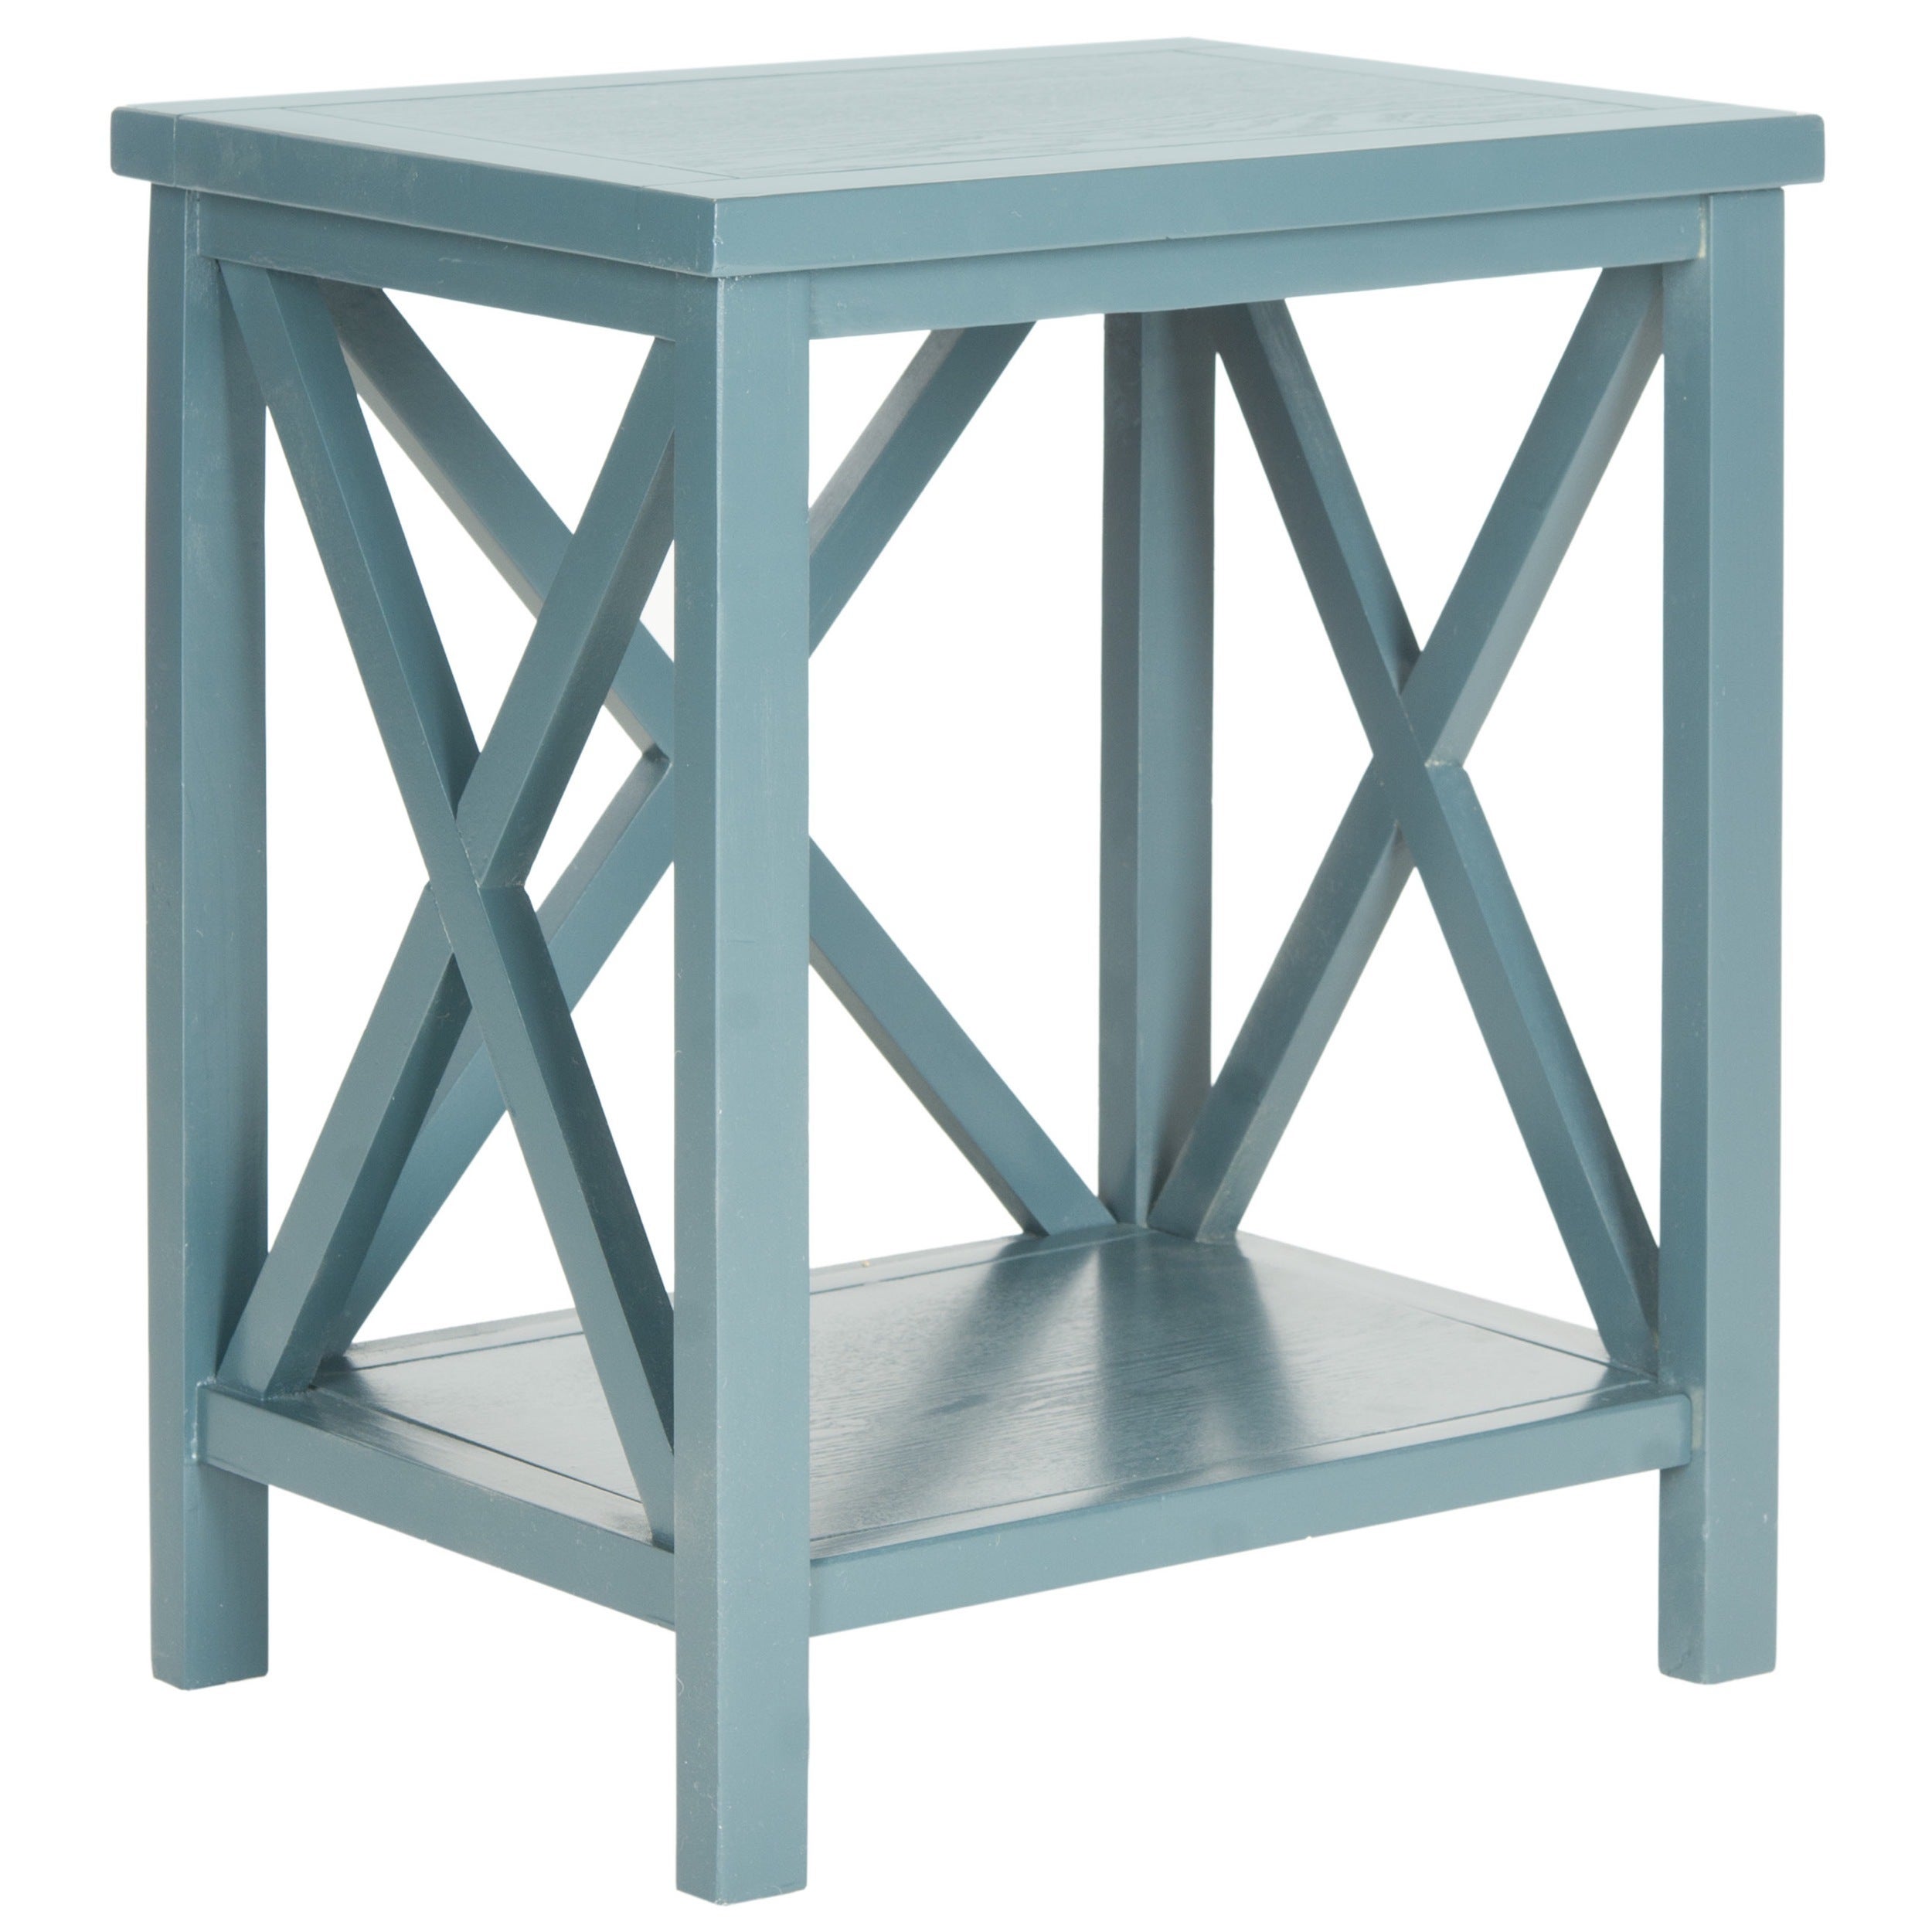 safavieh candence teal cross back end table free shipping today cube side small skinny tall accent with drawer couch tables fire pit and chairs thin riverside bedroom sets ethan